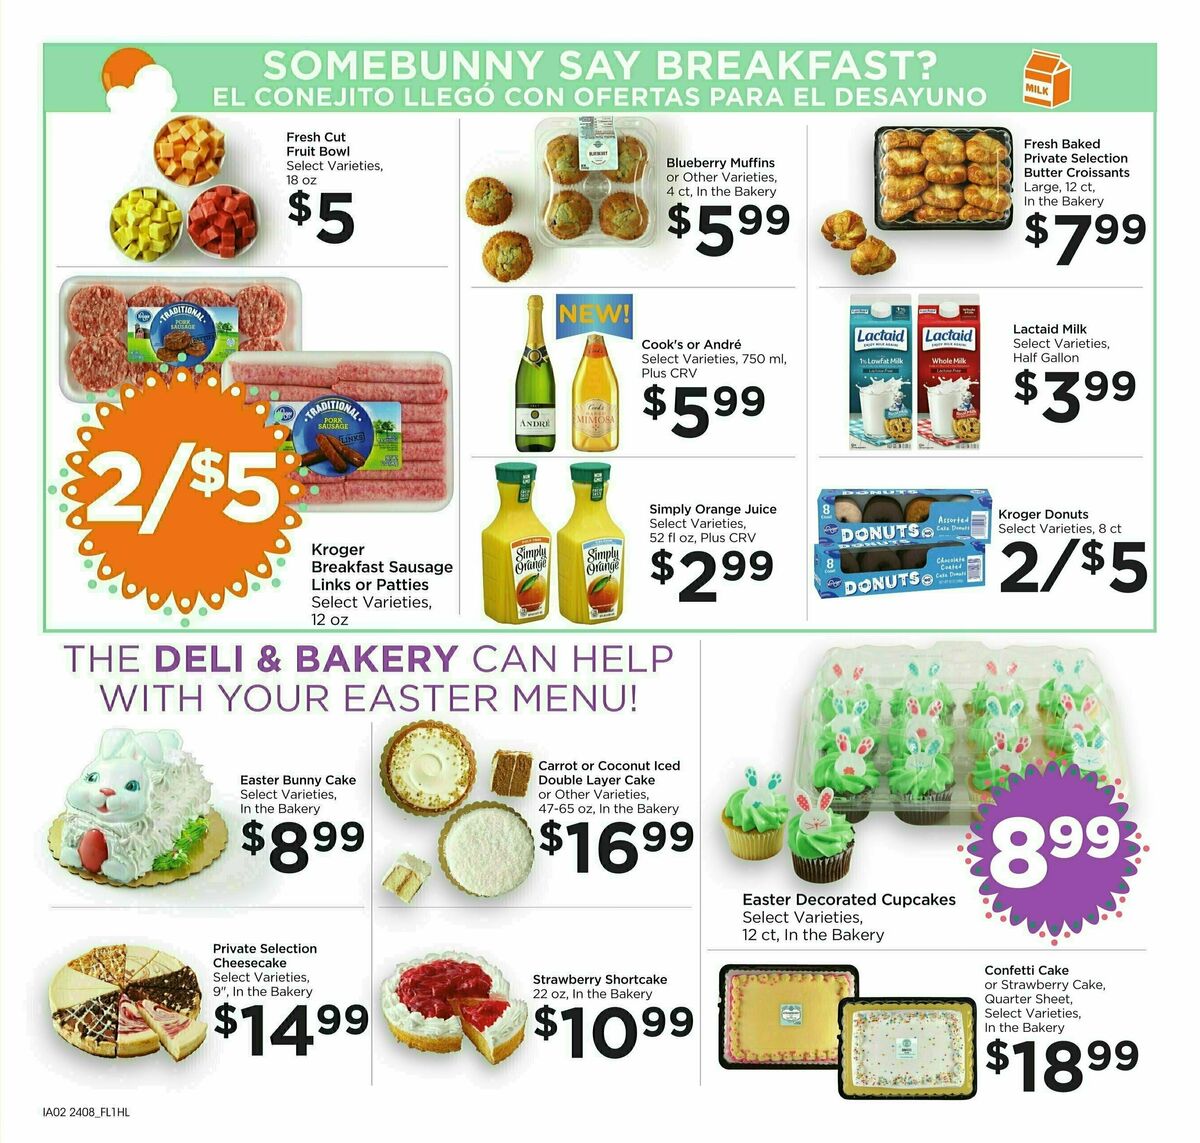 Food 4 Less Weekly Ad from March 27